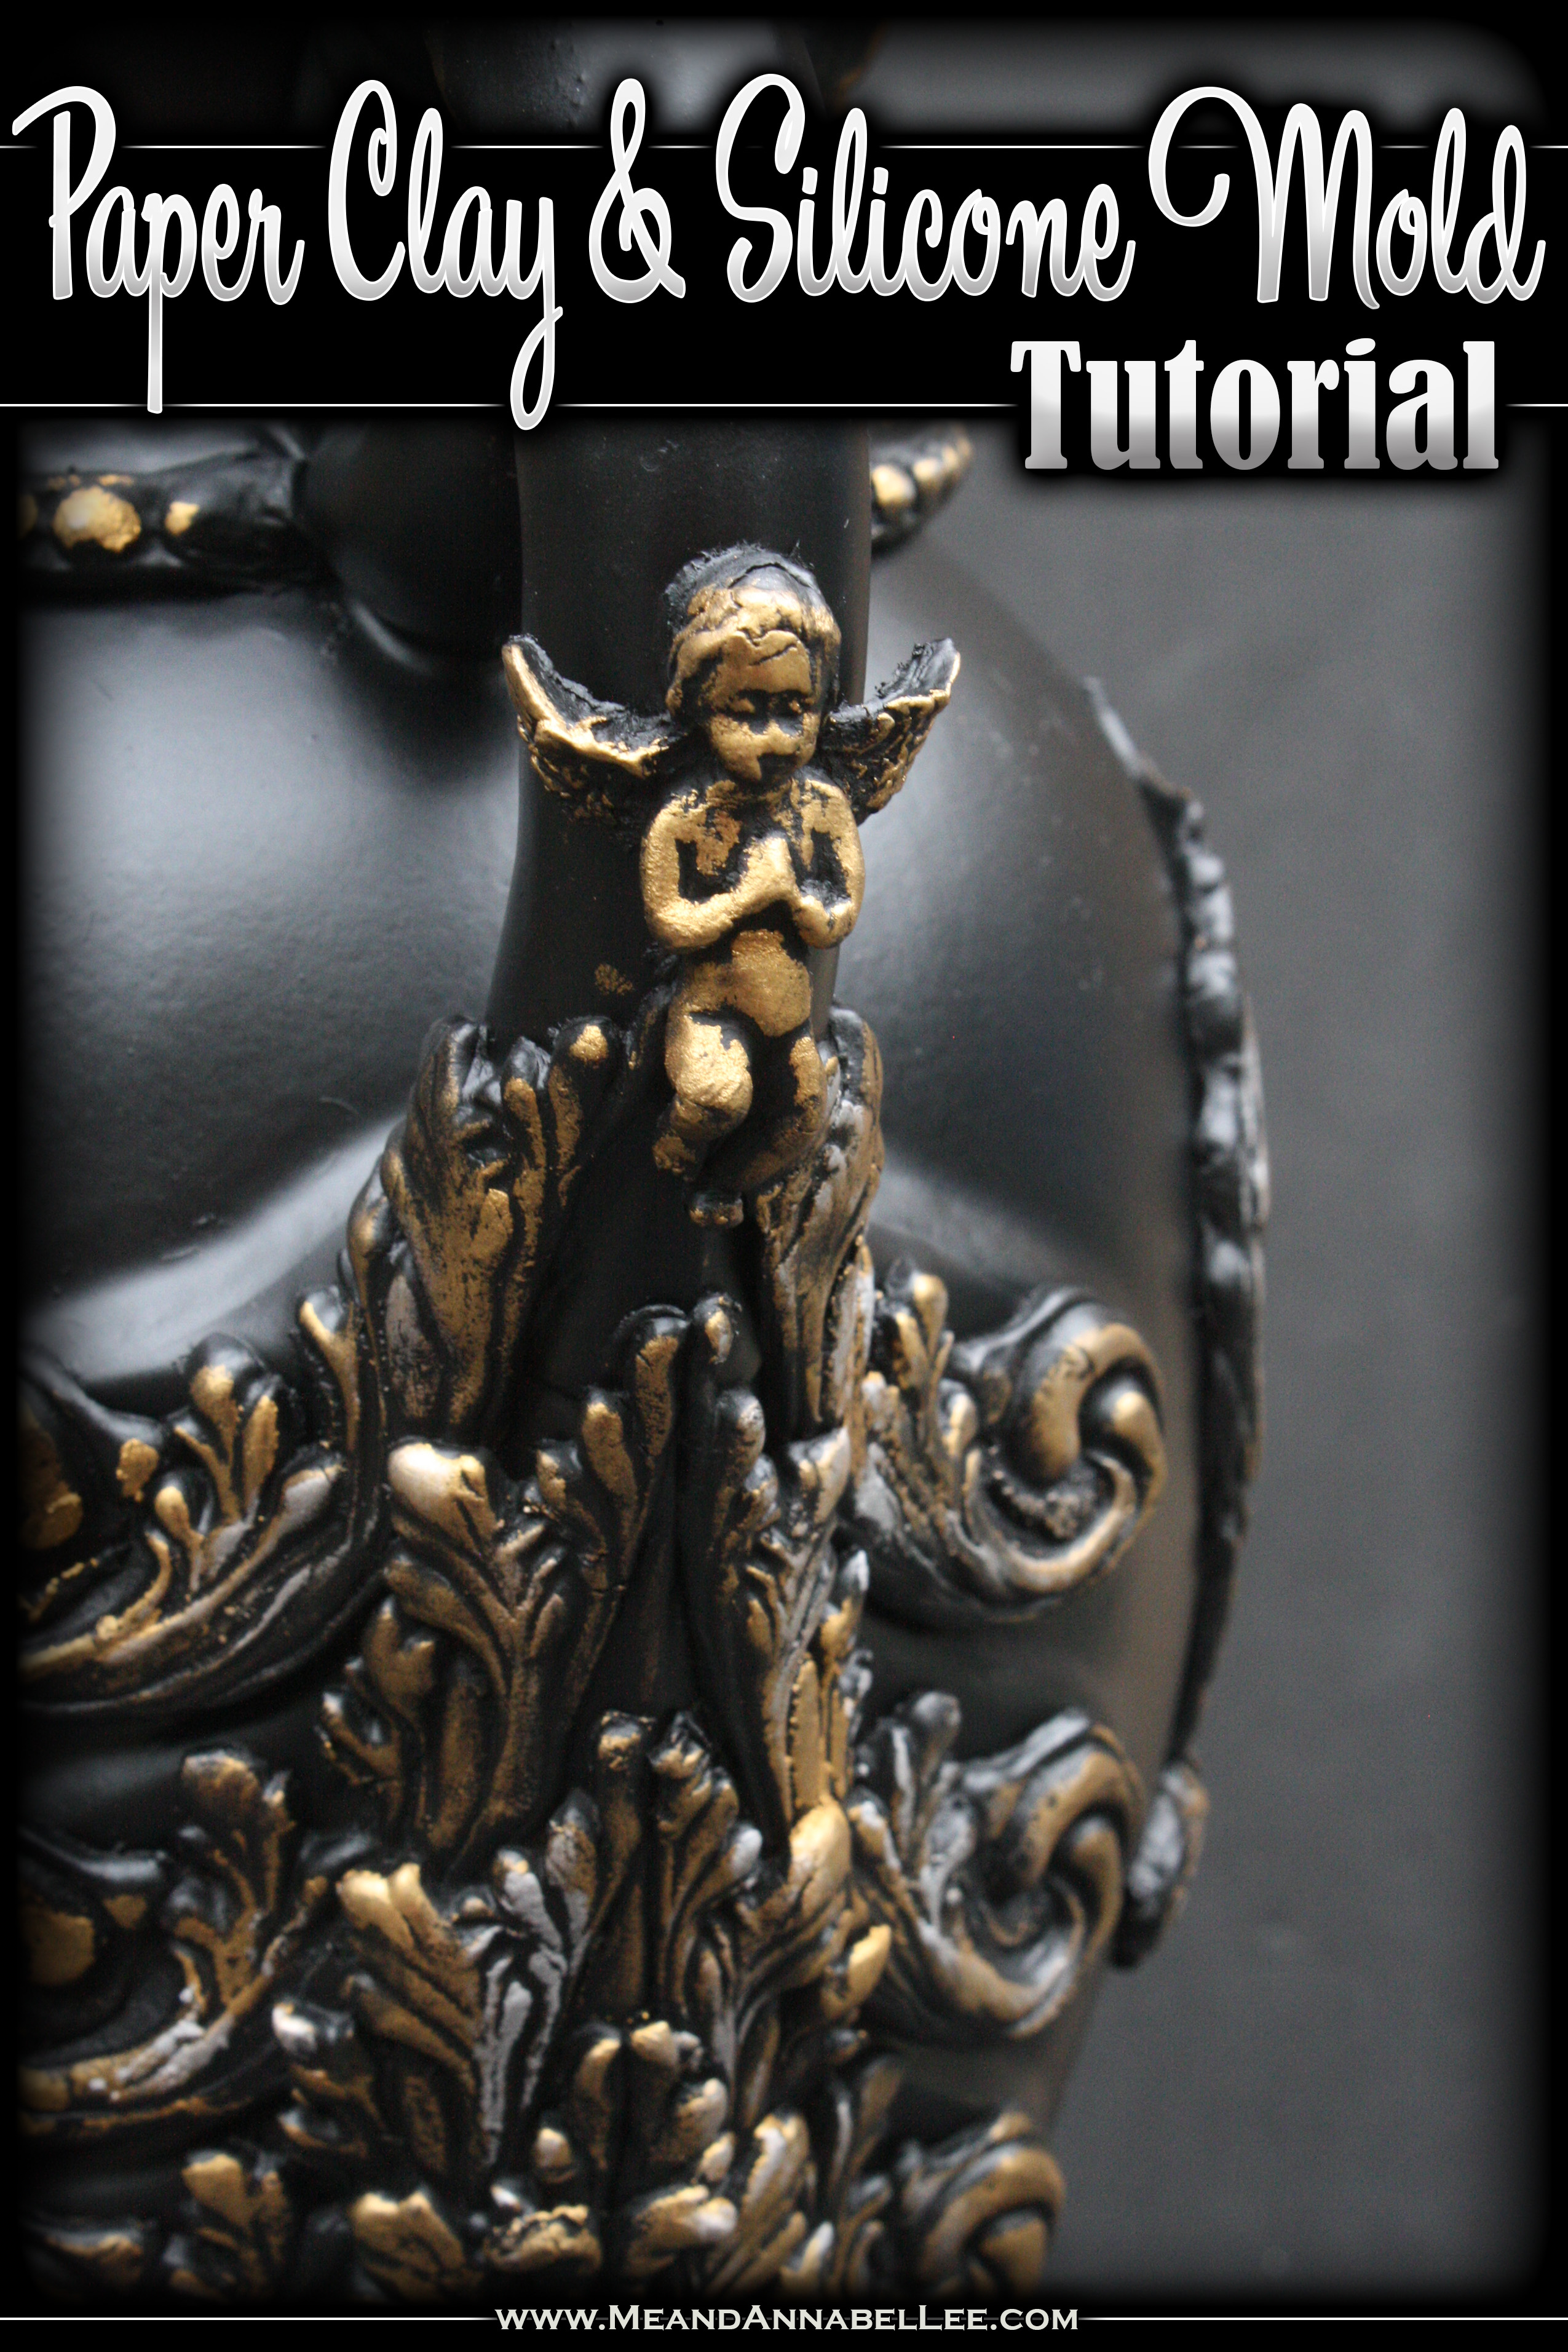 How to Use Paper Clay and Silicone Molds | Baroque Cherub | Trash to Treasure | DIY Victorian Gothic Vase | Paper Clay Casting | Faux Antique Finish | Goth Home Decor | www.MeandAnnabelLee.com